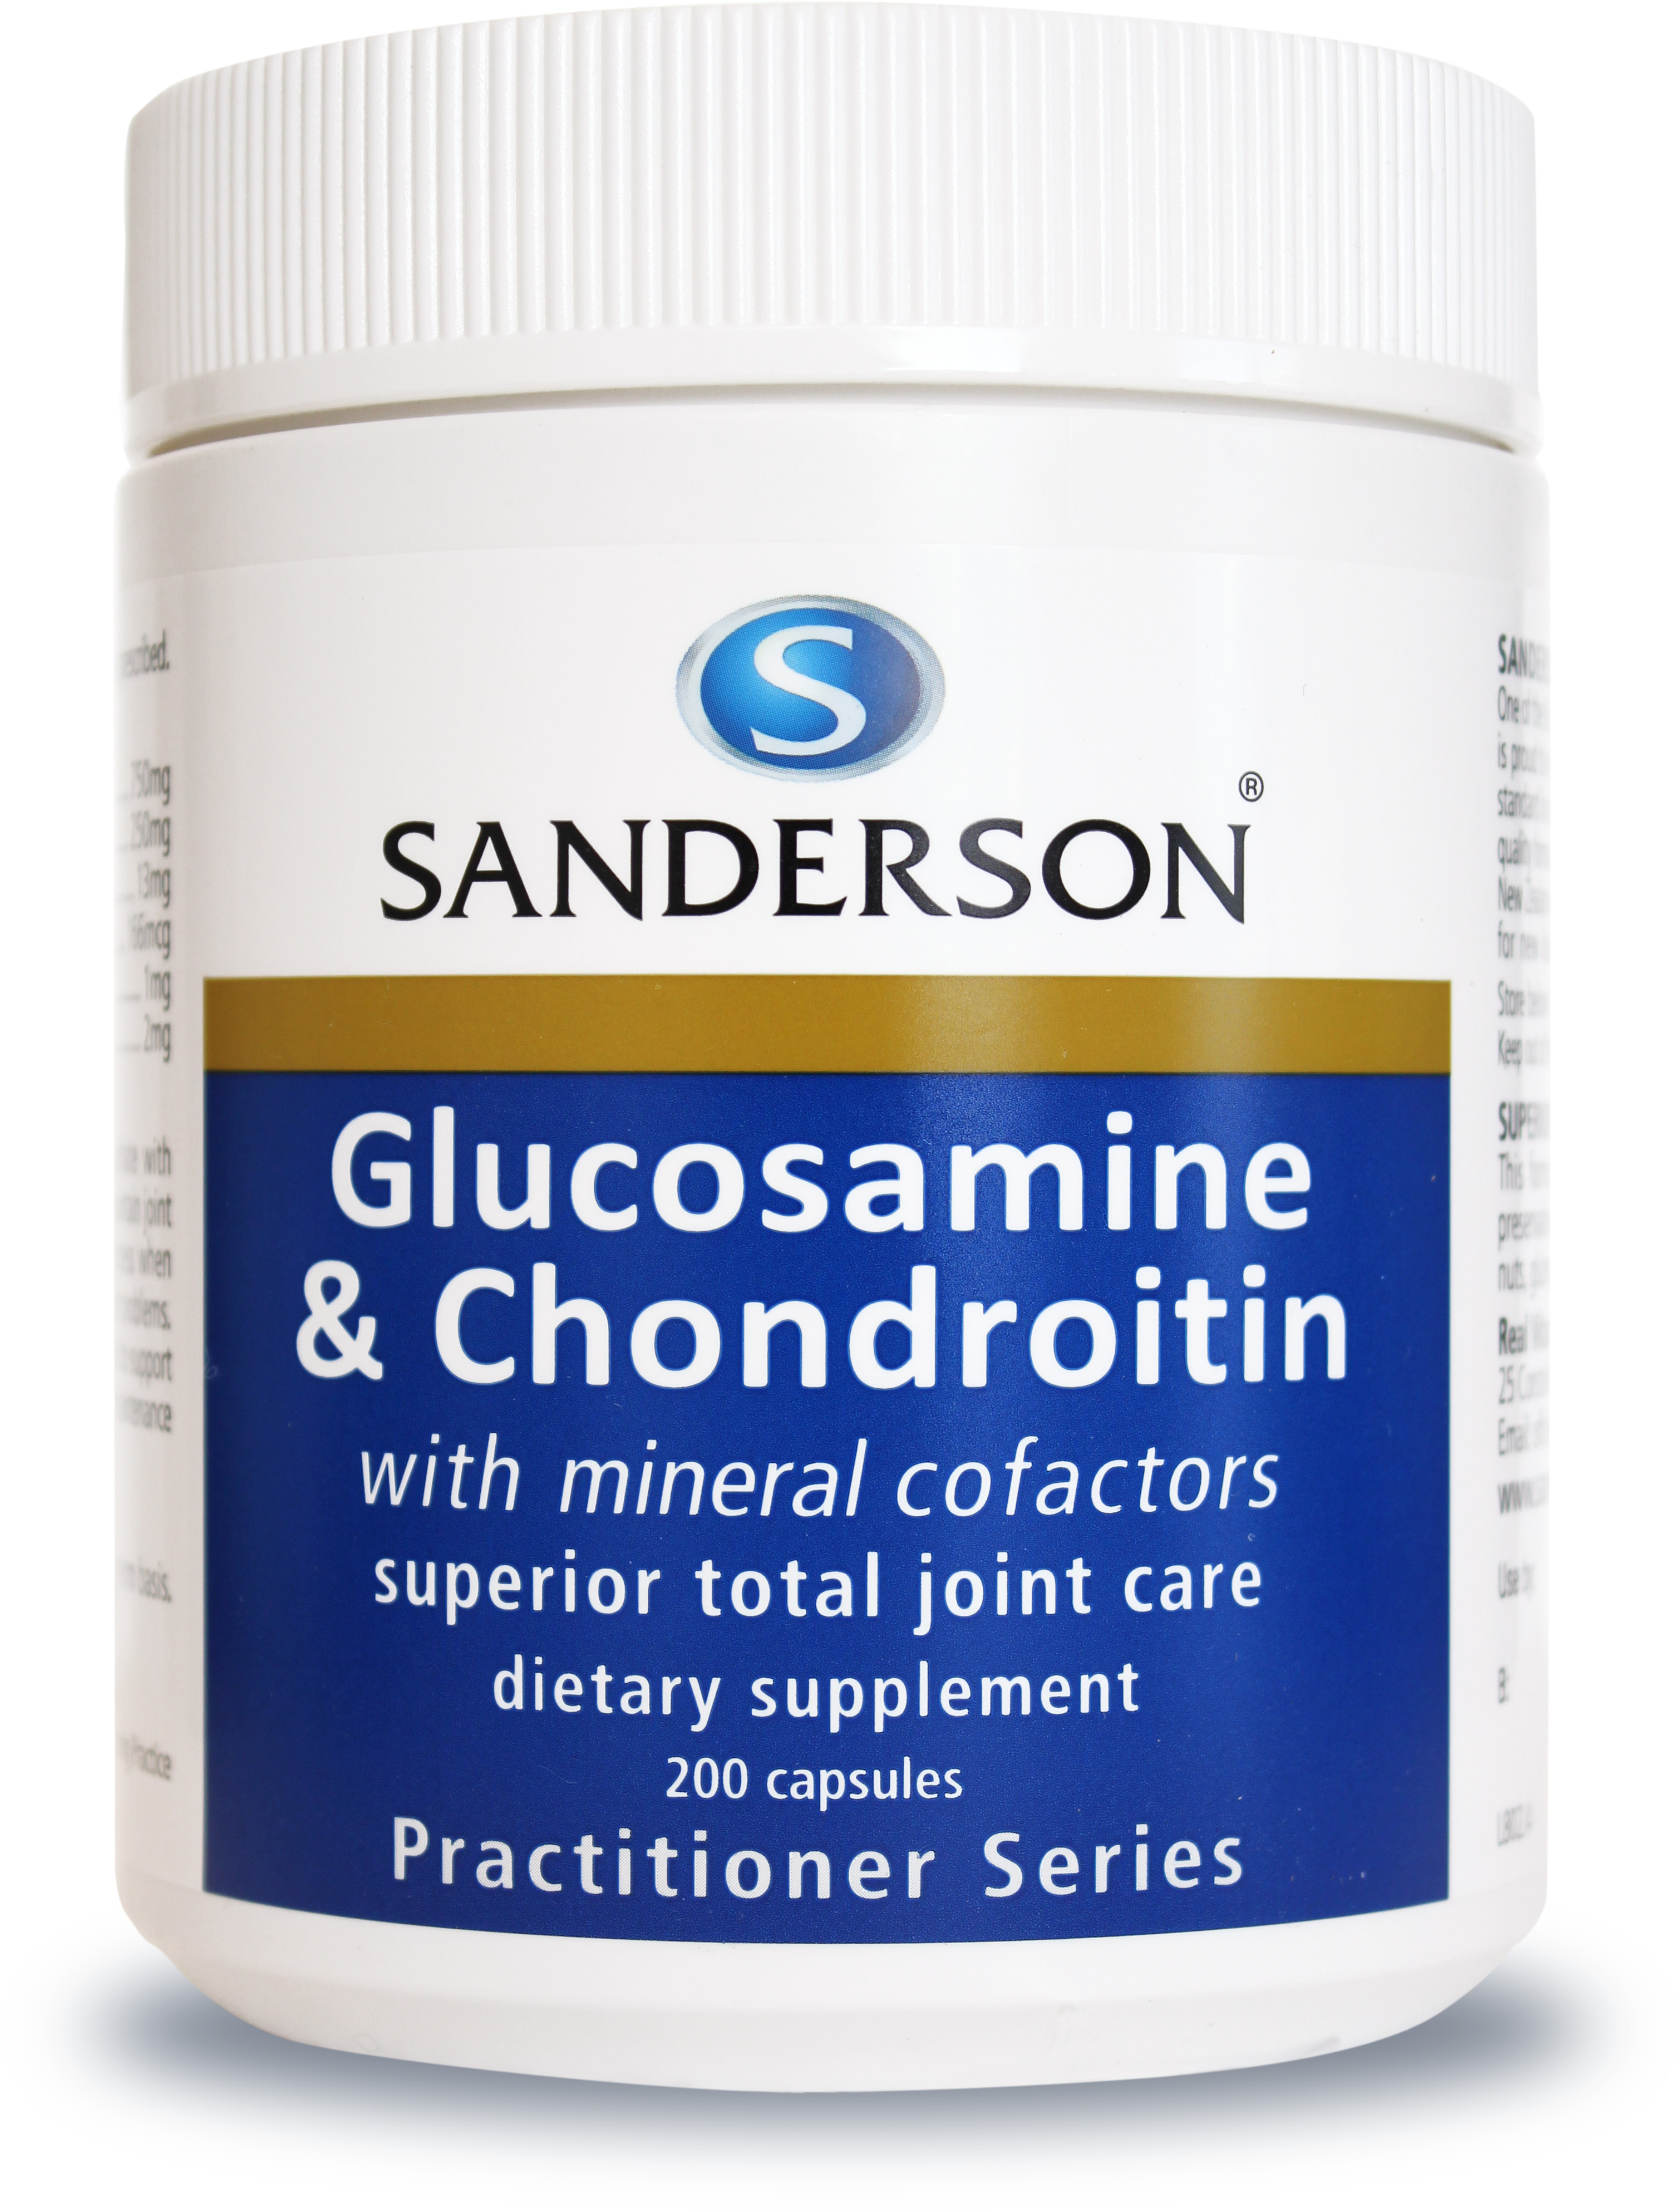 Sanderson Glucosamine & Chondroitin with co-factors 200 Capsules